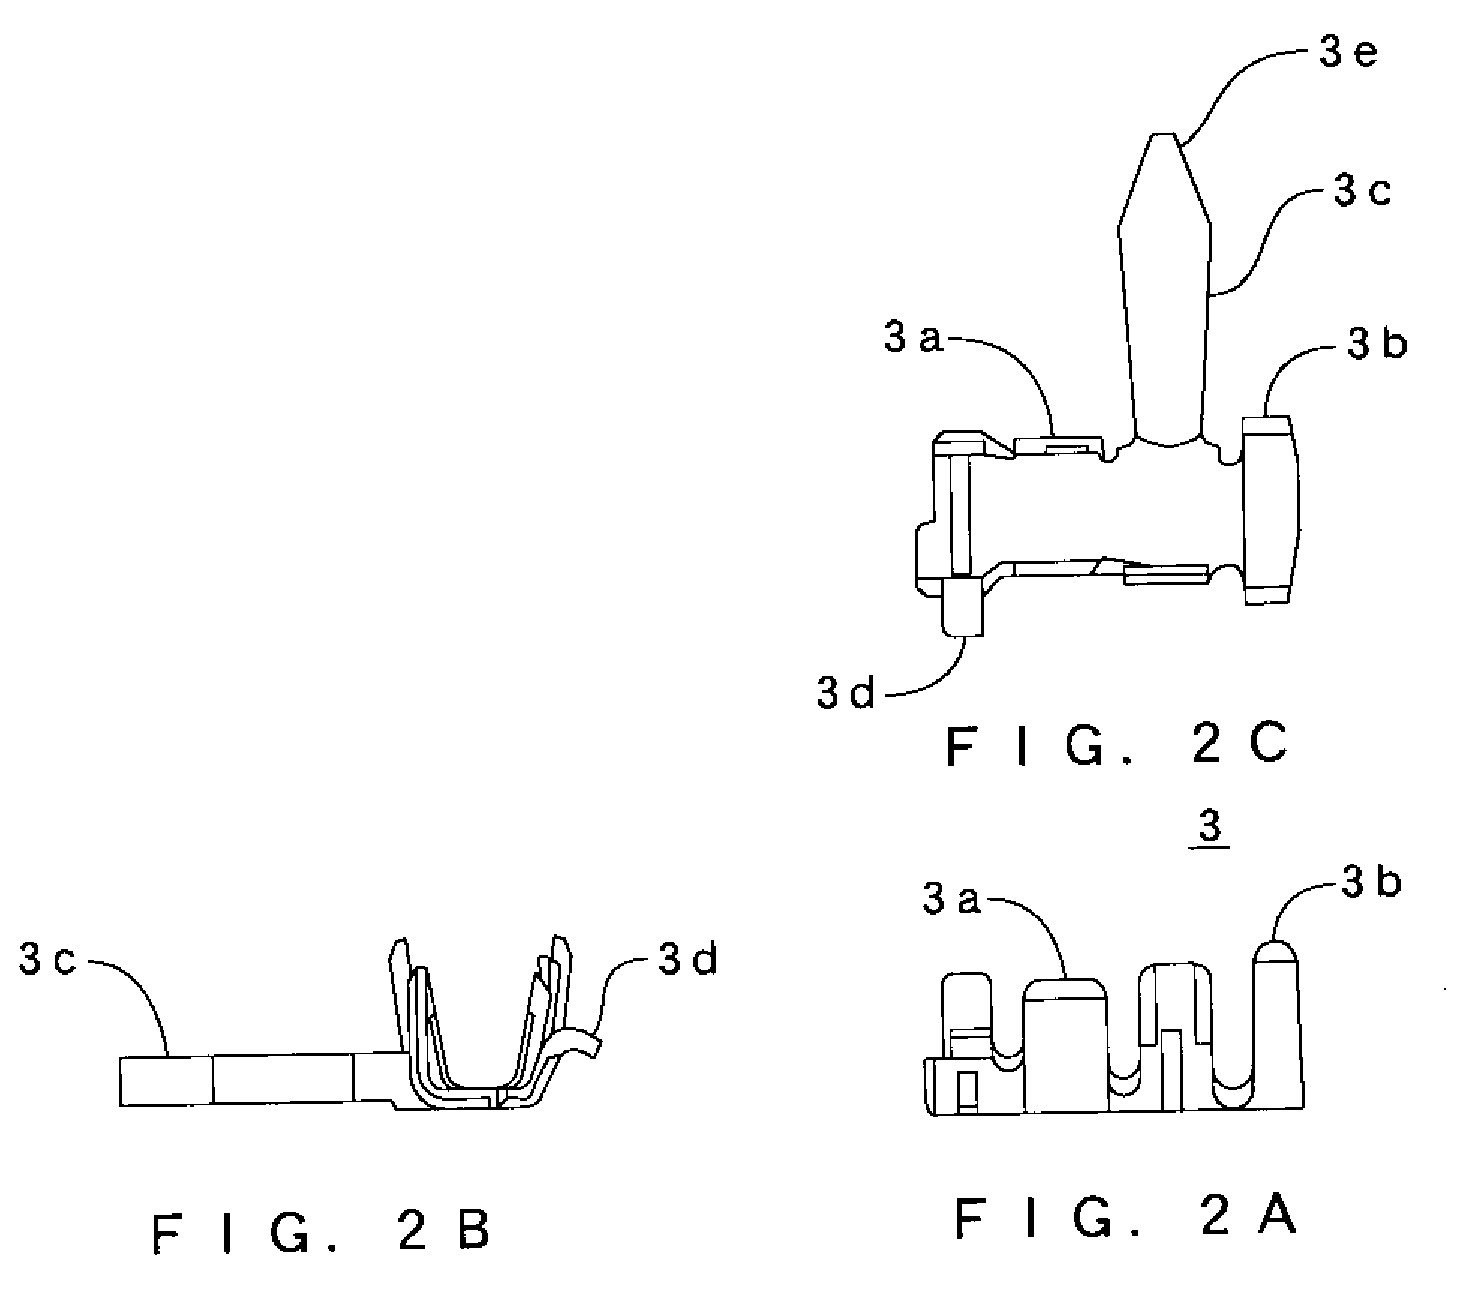 Structure for drawing out lead wires from a coil device